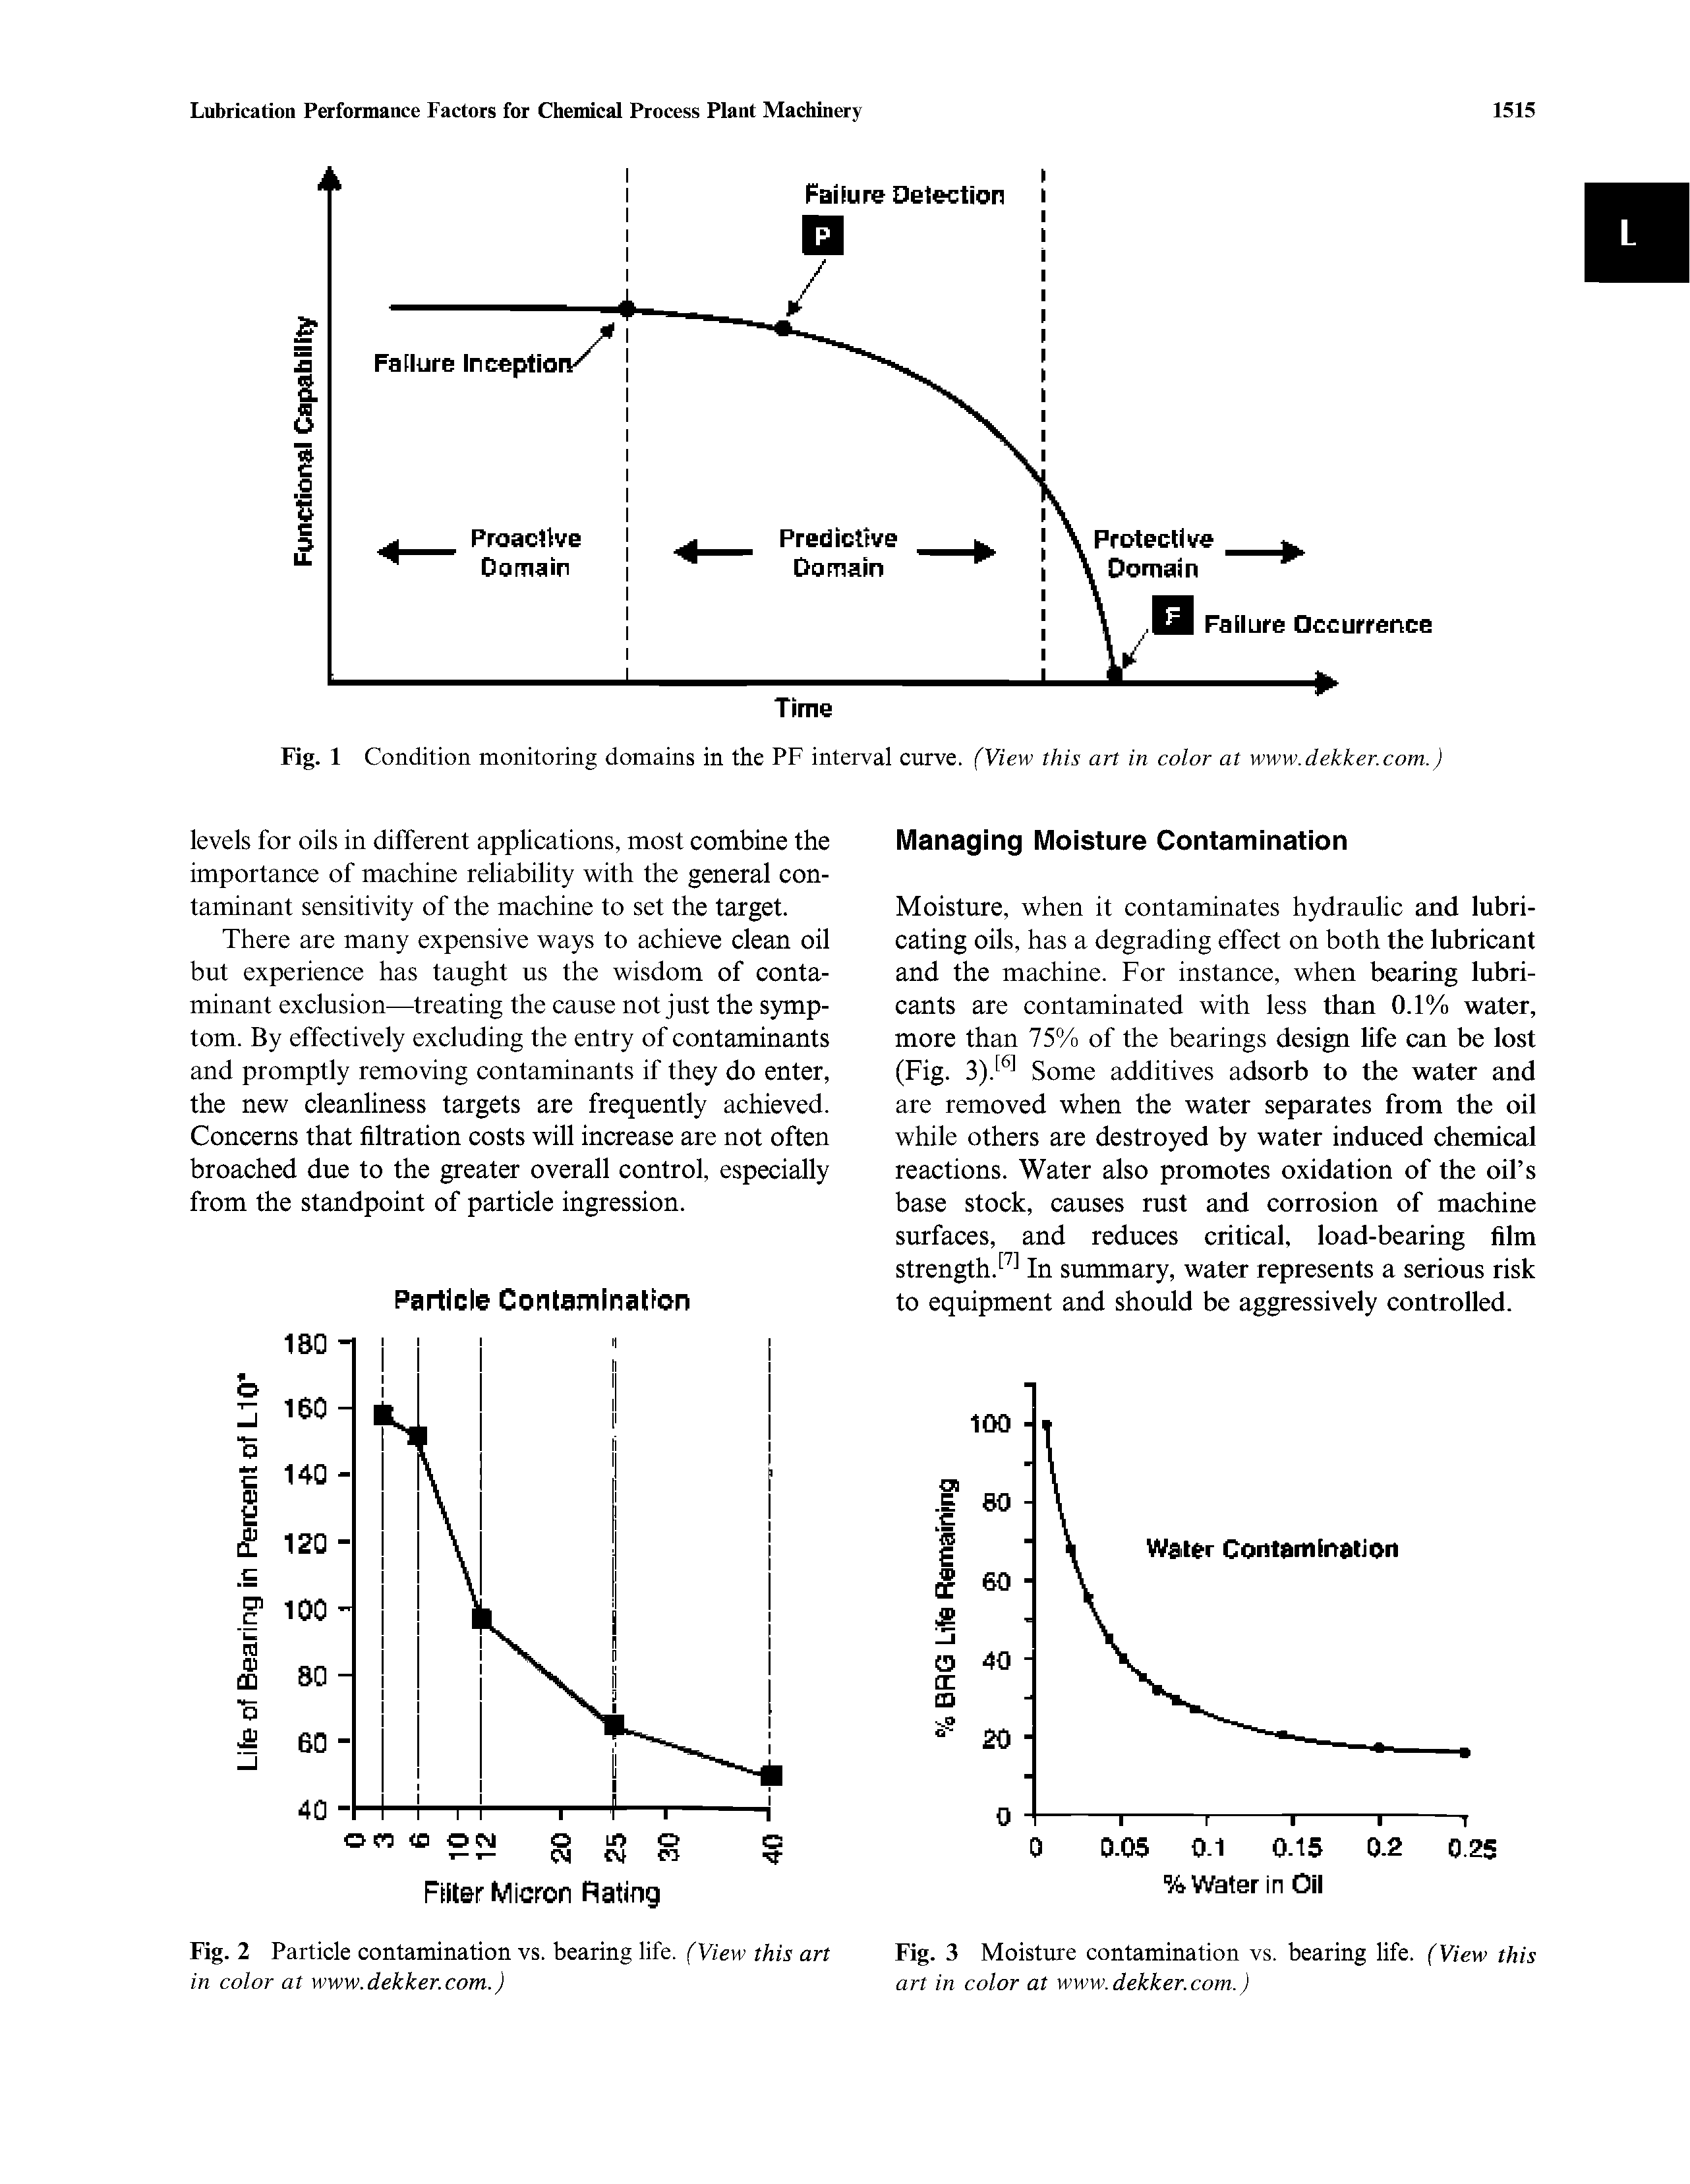 Fig. 3 Moisture contamination vs. bearing life. (View this art in color at www.dekker.com.)...